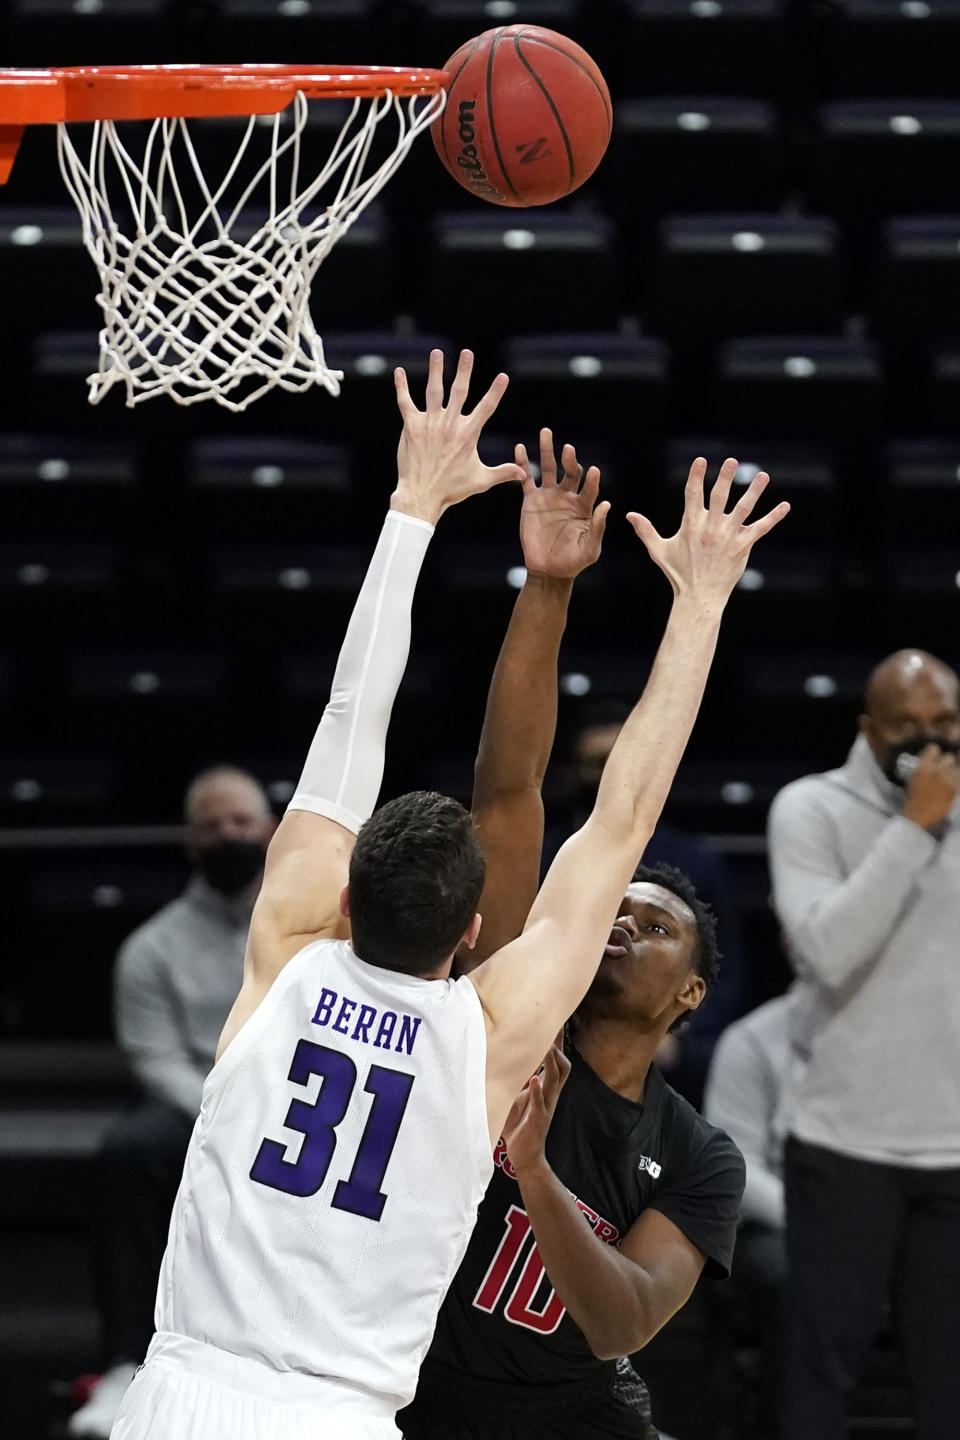 Rutgers guard Montez Mathis, right, shoots against Northwestern forward Robbie Beran during the first half of an NCAA college basketball game in Evanston, Ill., Sunday, Jan. 31, 2021. (AP Photo/Nam Y. Huh)